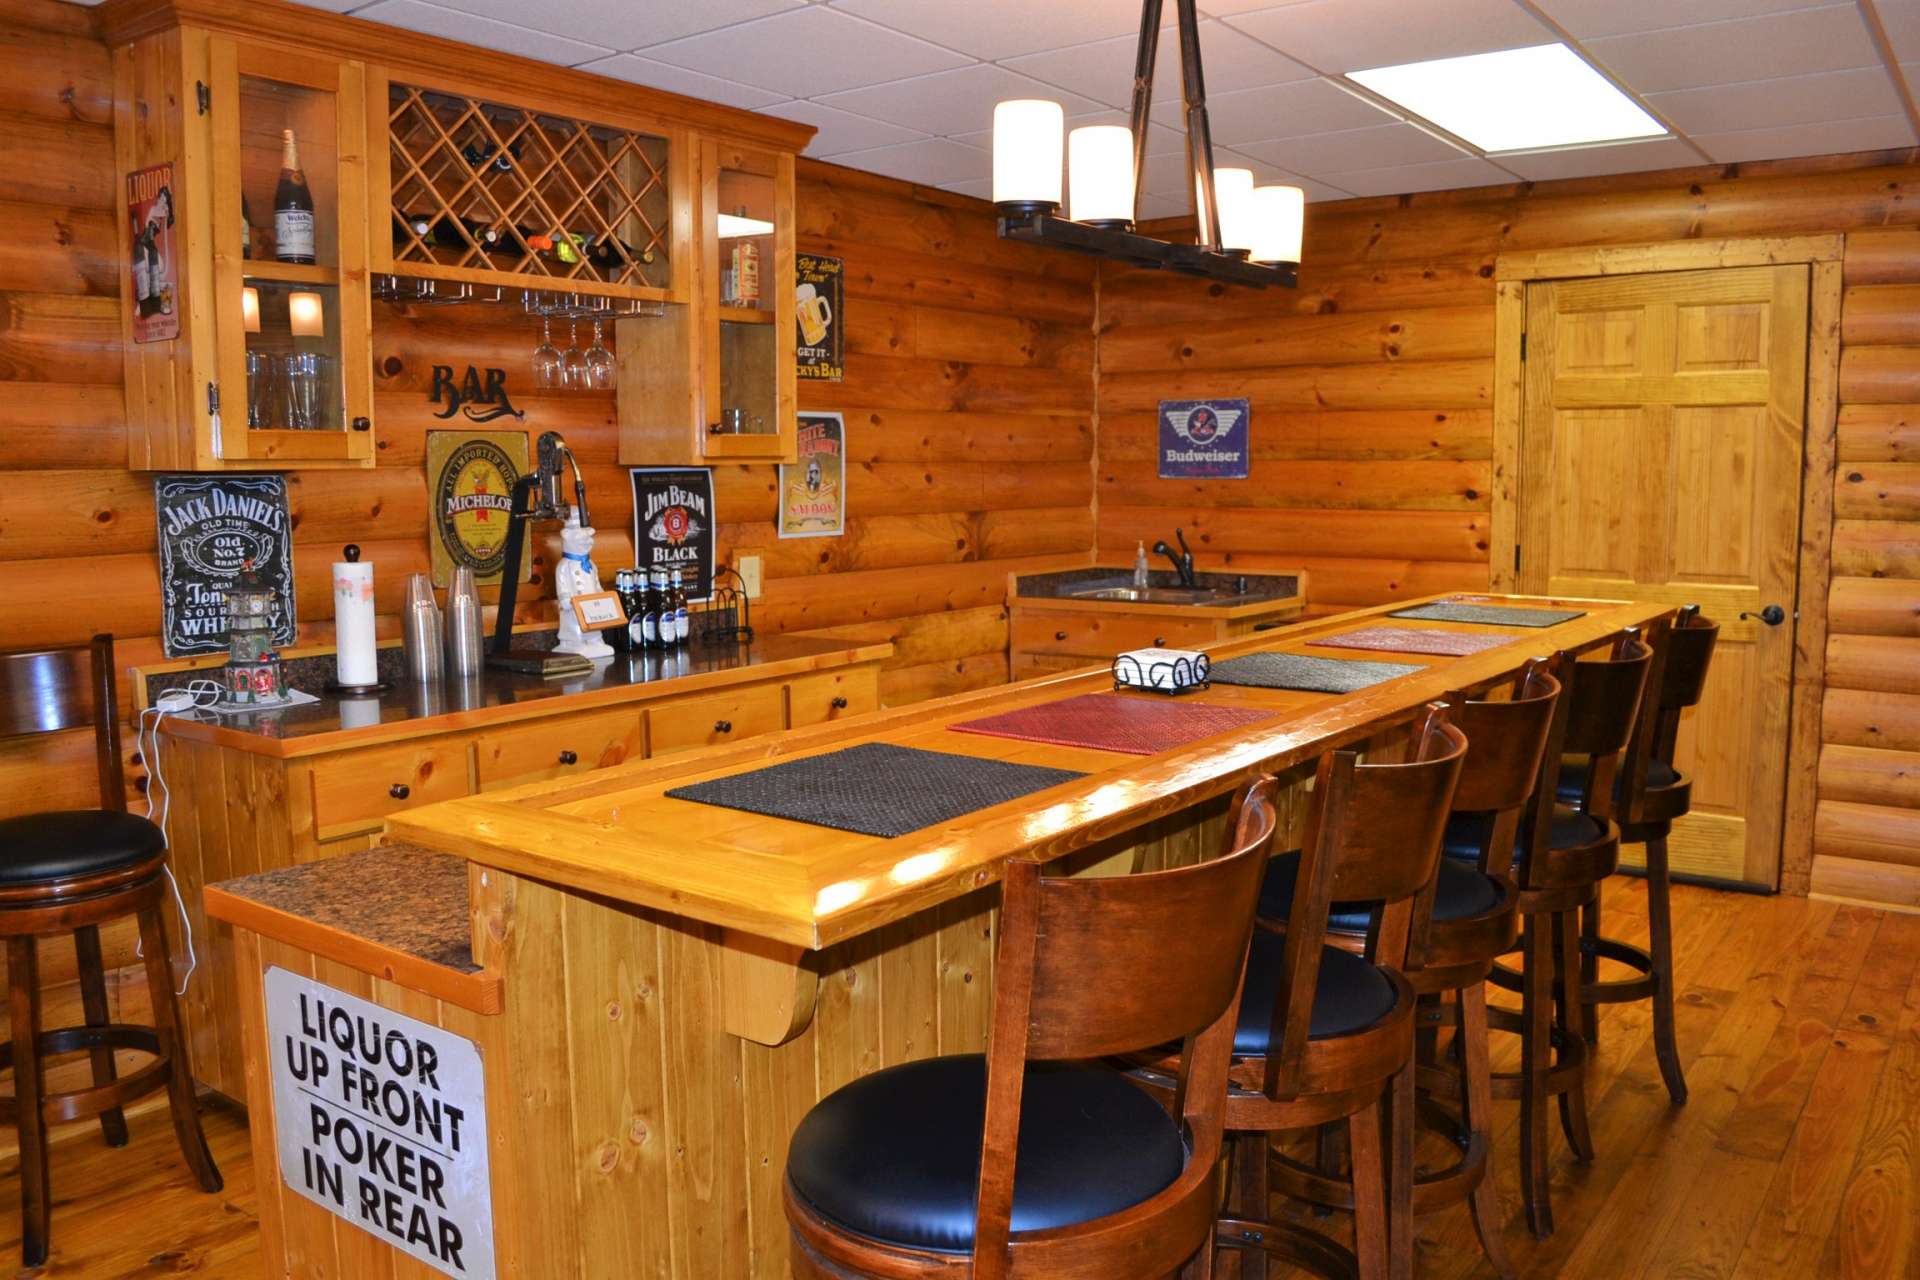 A Fully equipped bar area includes...